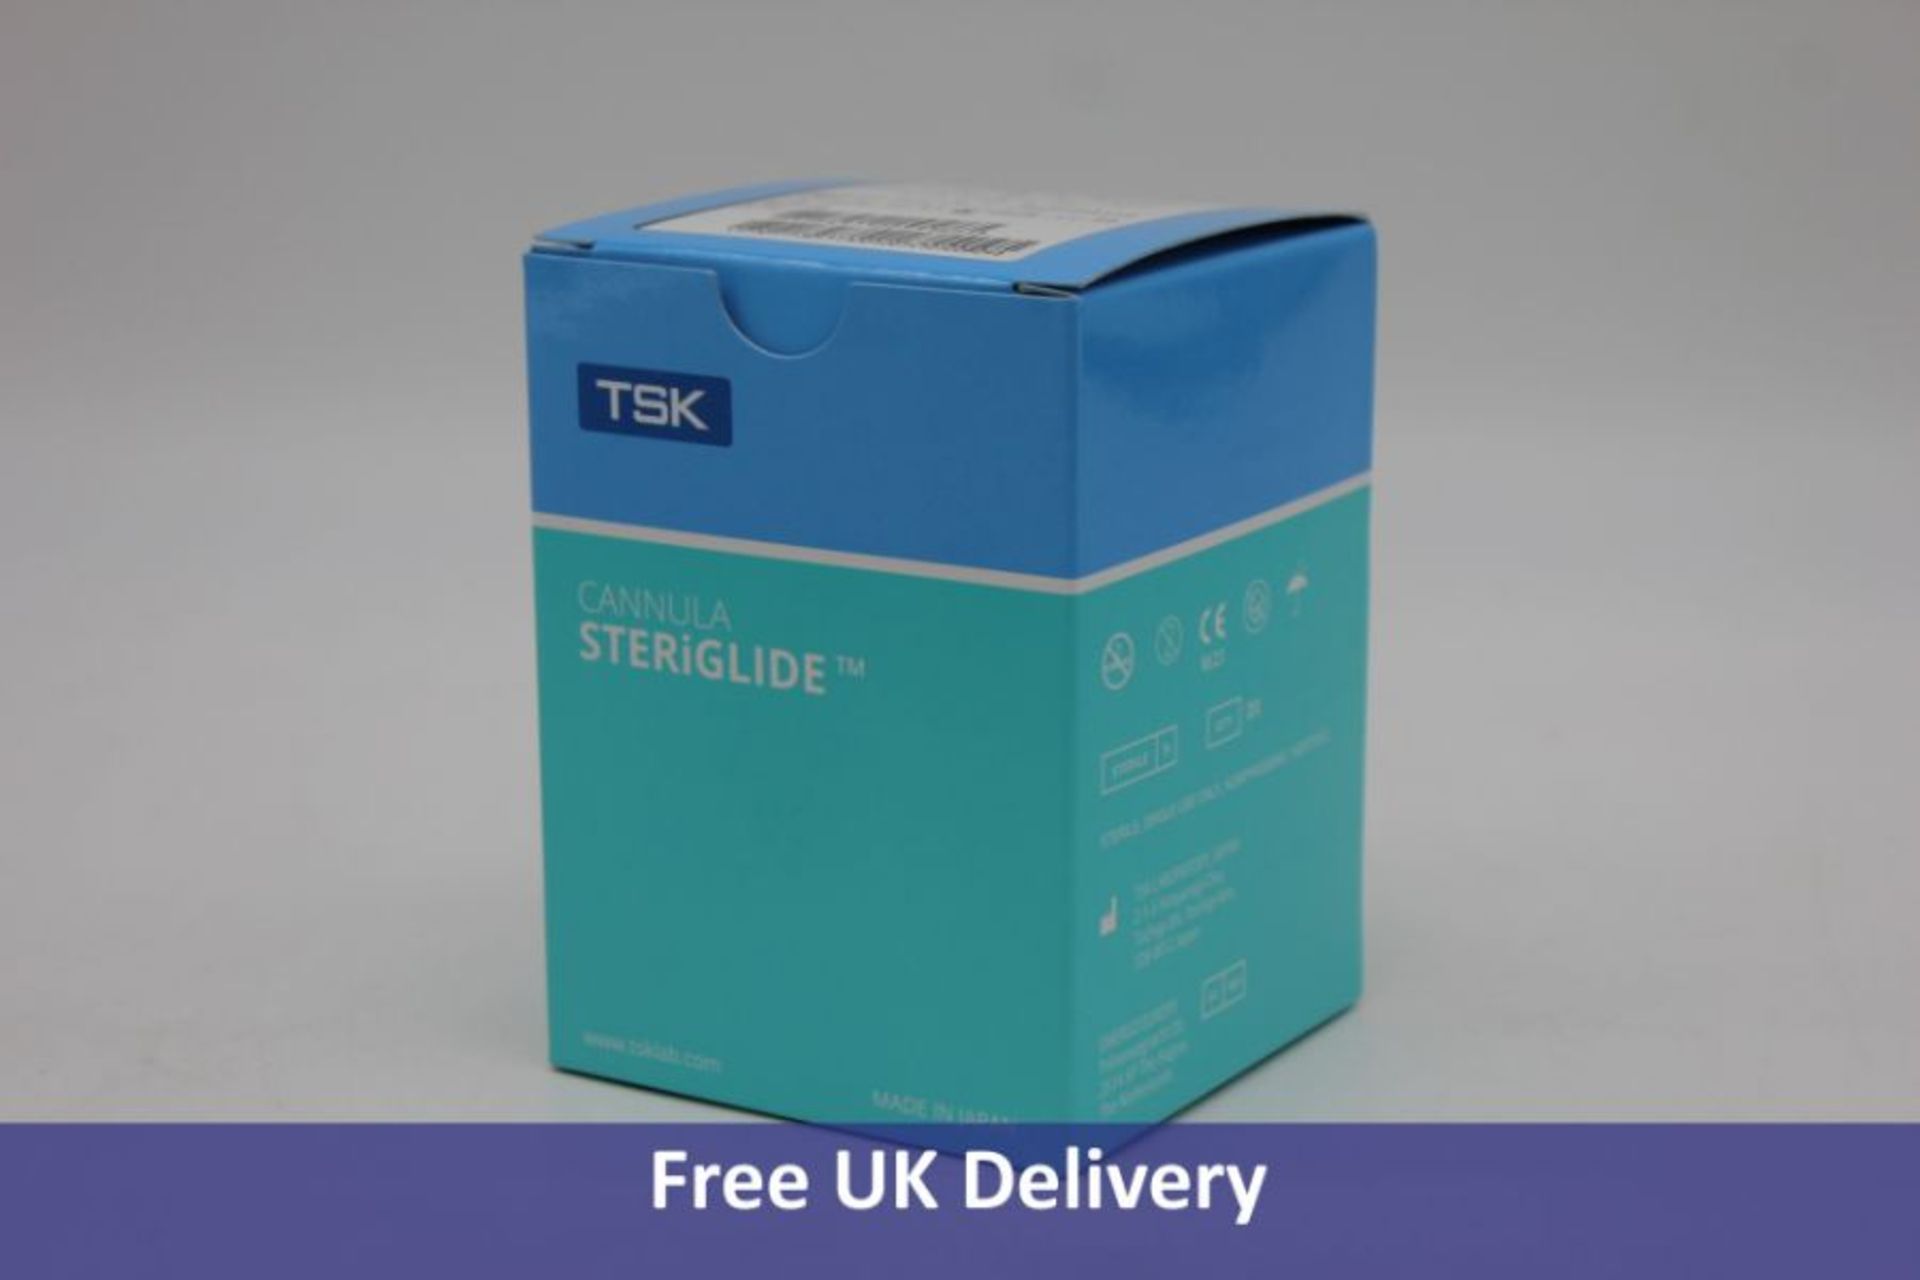 Steriglide Cannula Healthcare Products to include 1x Size 22G X 2", LOT 208046, Expiry Date 2025-11- - Image 3 of 3